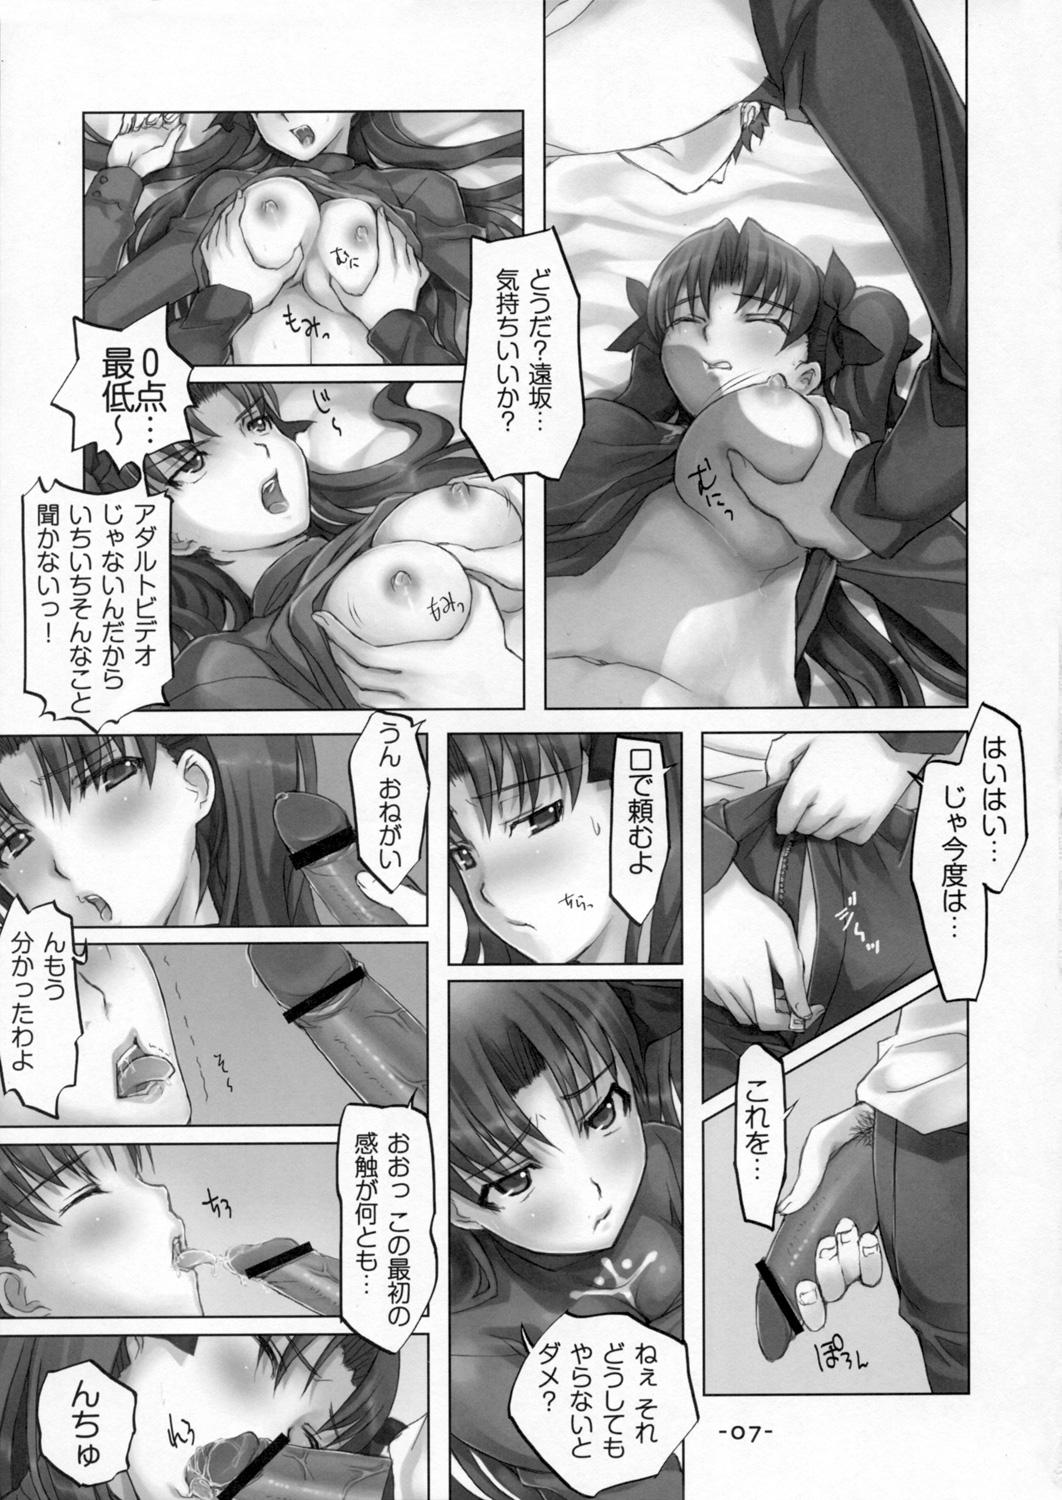 Para DAILY LIFE - Fate stay night Fate hollow ataraxia Village - Page 6